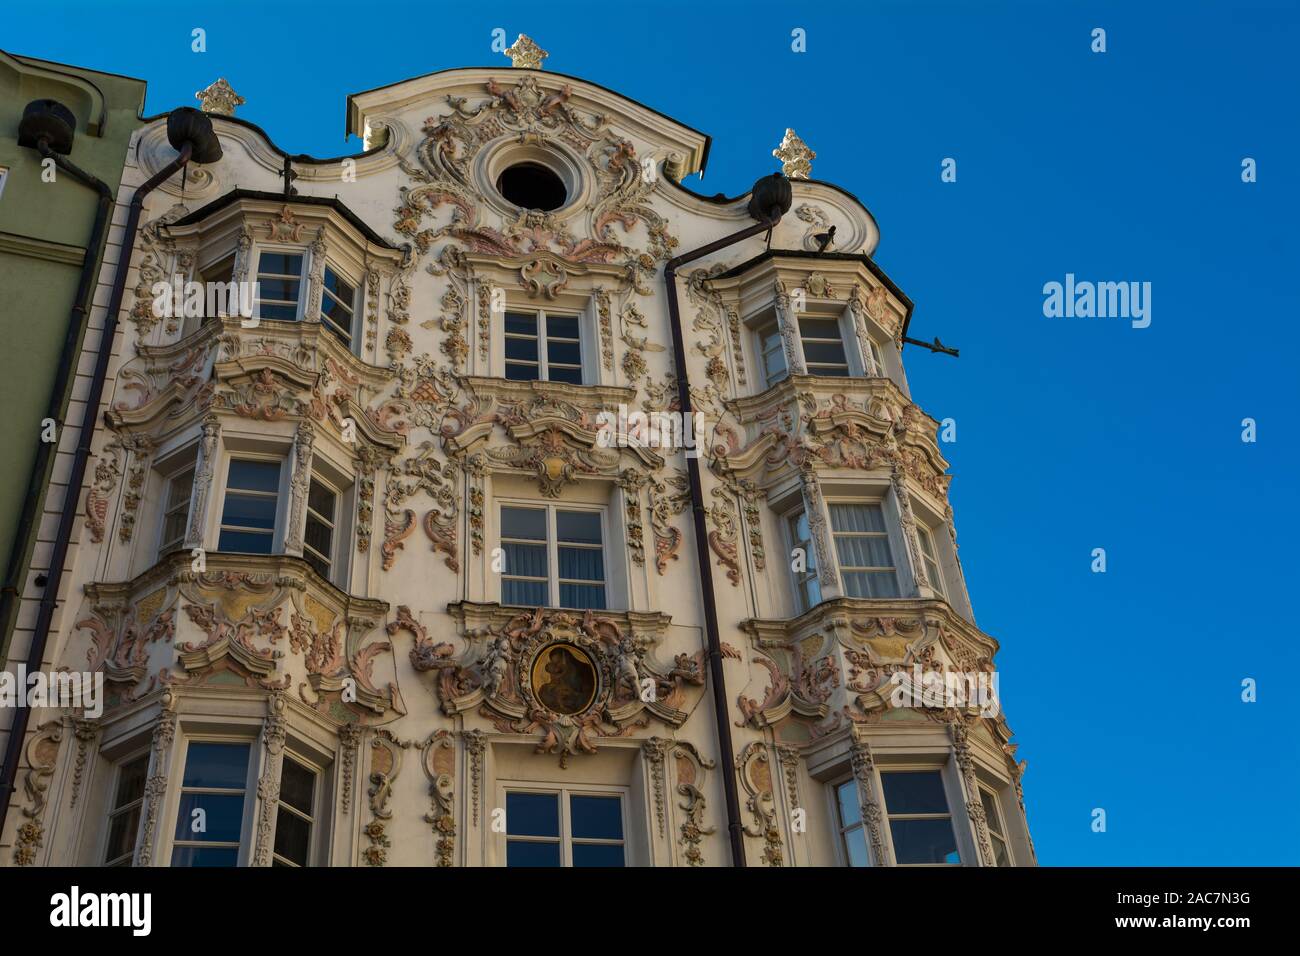 Helbling house in Innsbruck. This house presenting windows frames and a very decorated pediment - INNSBRUCK, Austria - October 26, 2019. Stock Photo